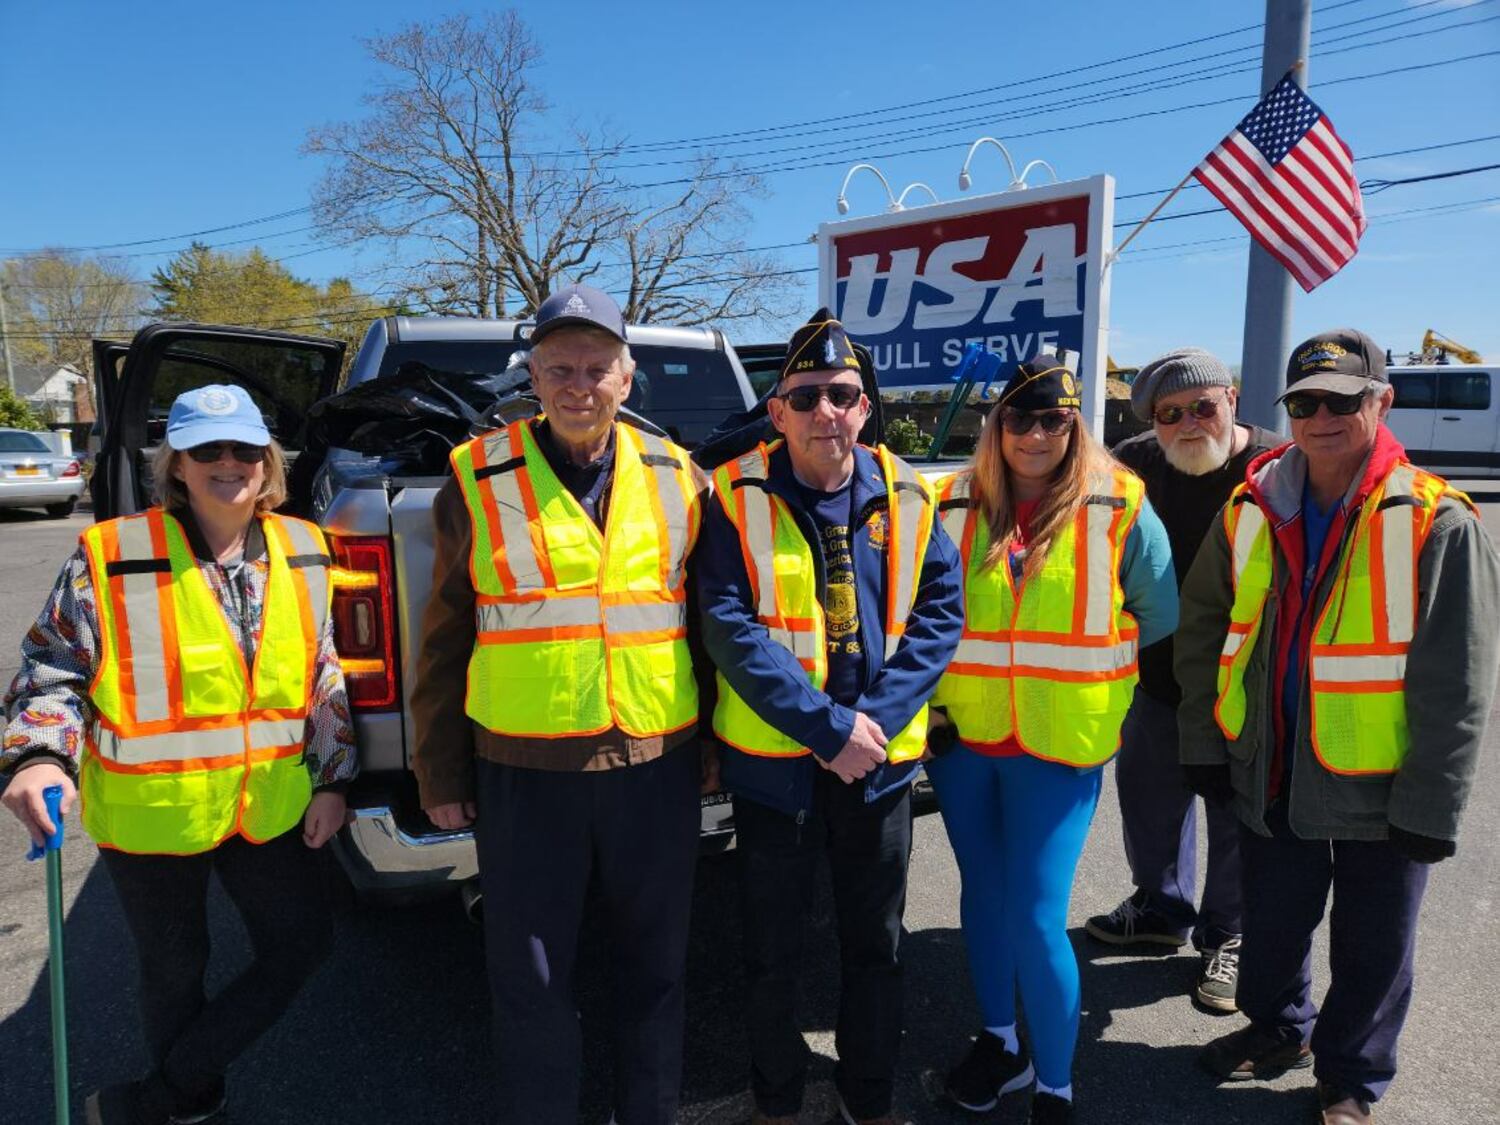 Members of the Westhampton American Legion Post 834, from left, Susan Berdinka, Tom Gadlock, Tom Quinn, Lisha Terry, Paul Haines and Mike Berdinka, recently volunteered their time to pick up trash along Montauk Highway monthly as part of the Adopt A Highway Program. COURTESY TOM HADLOCK